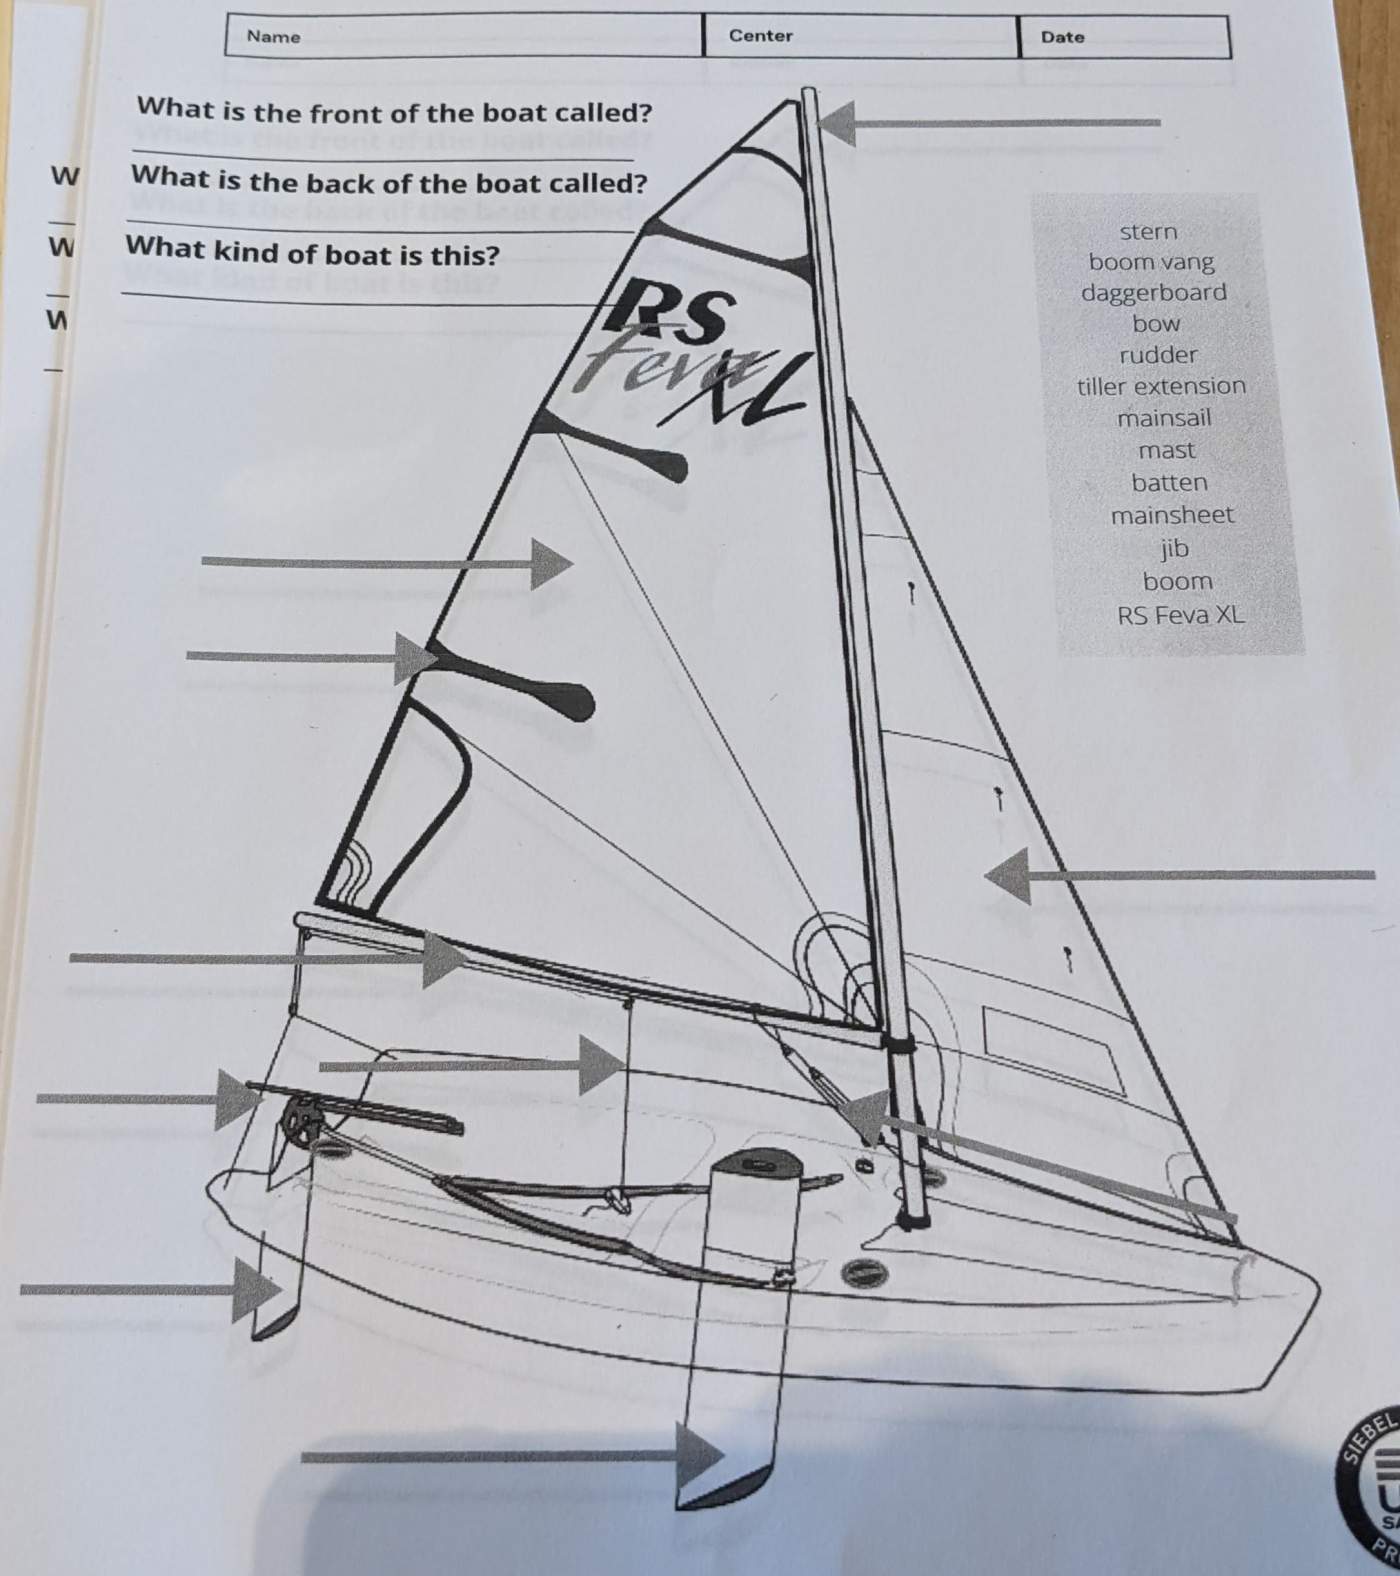 A test on the parts of a sailboat